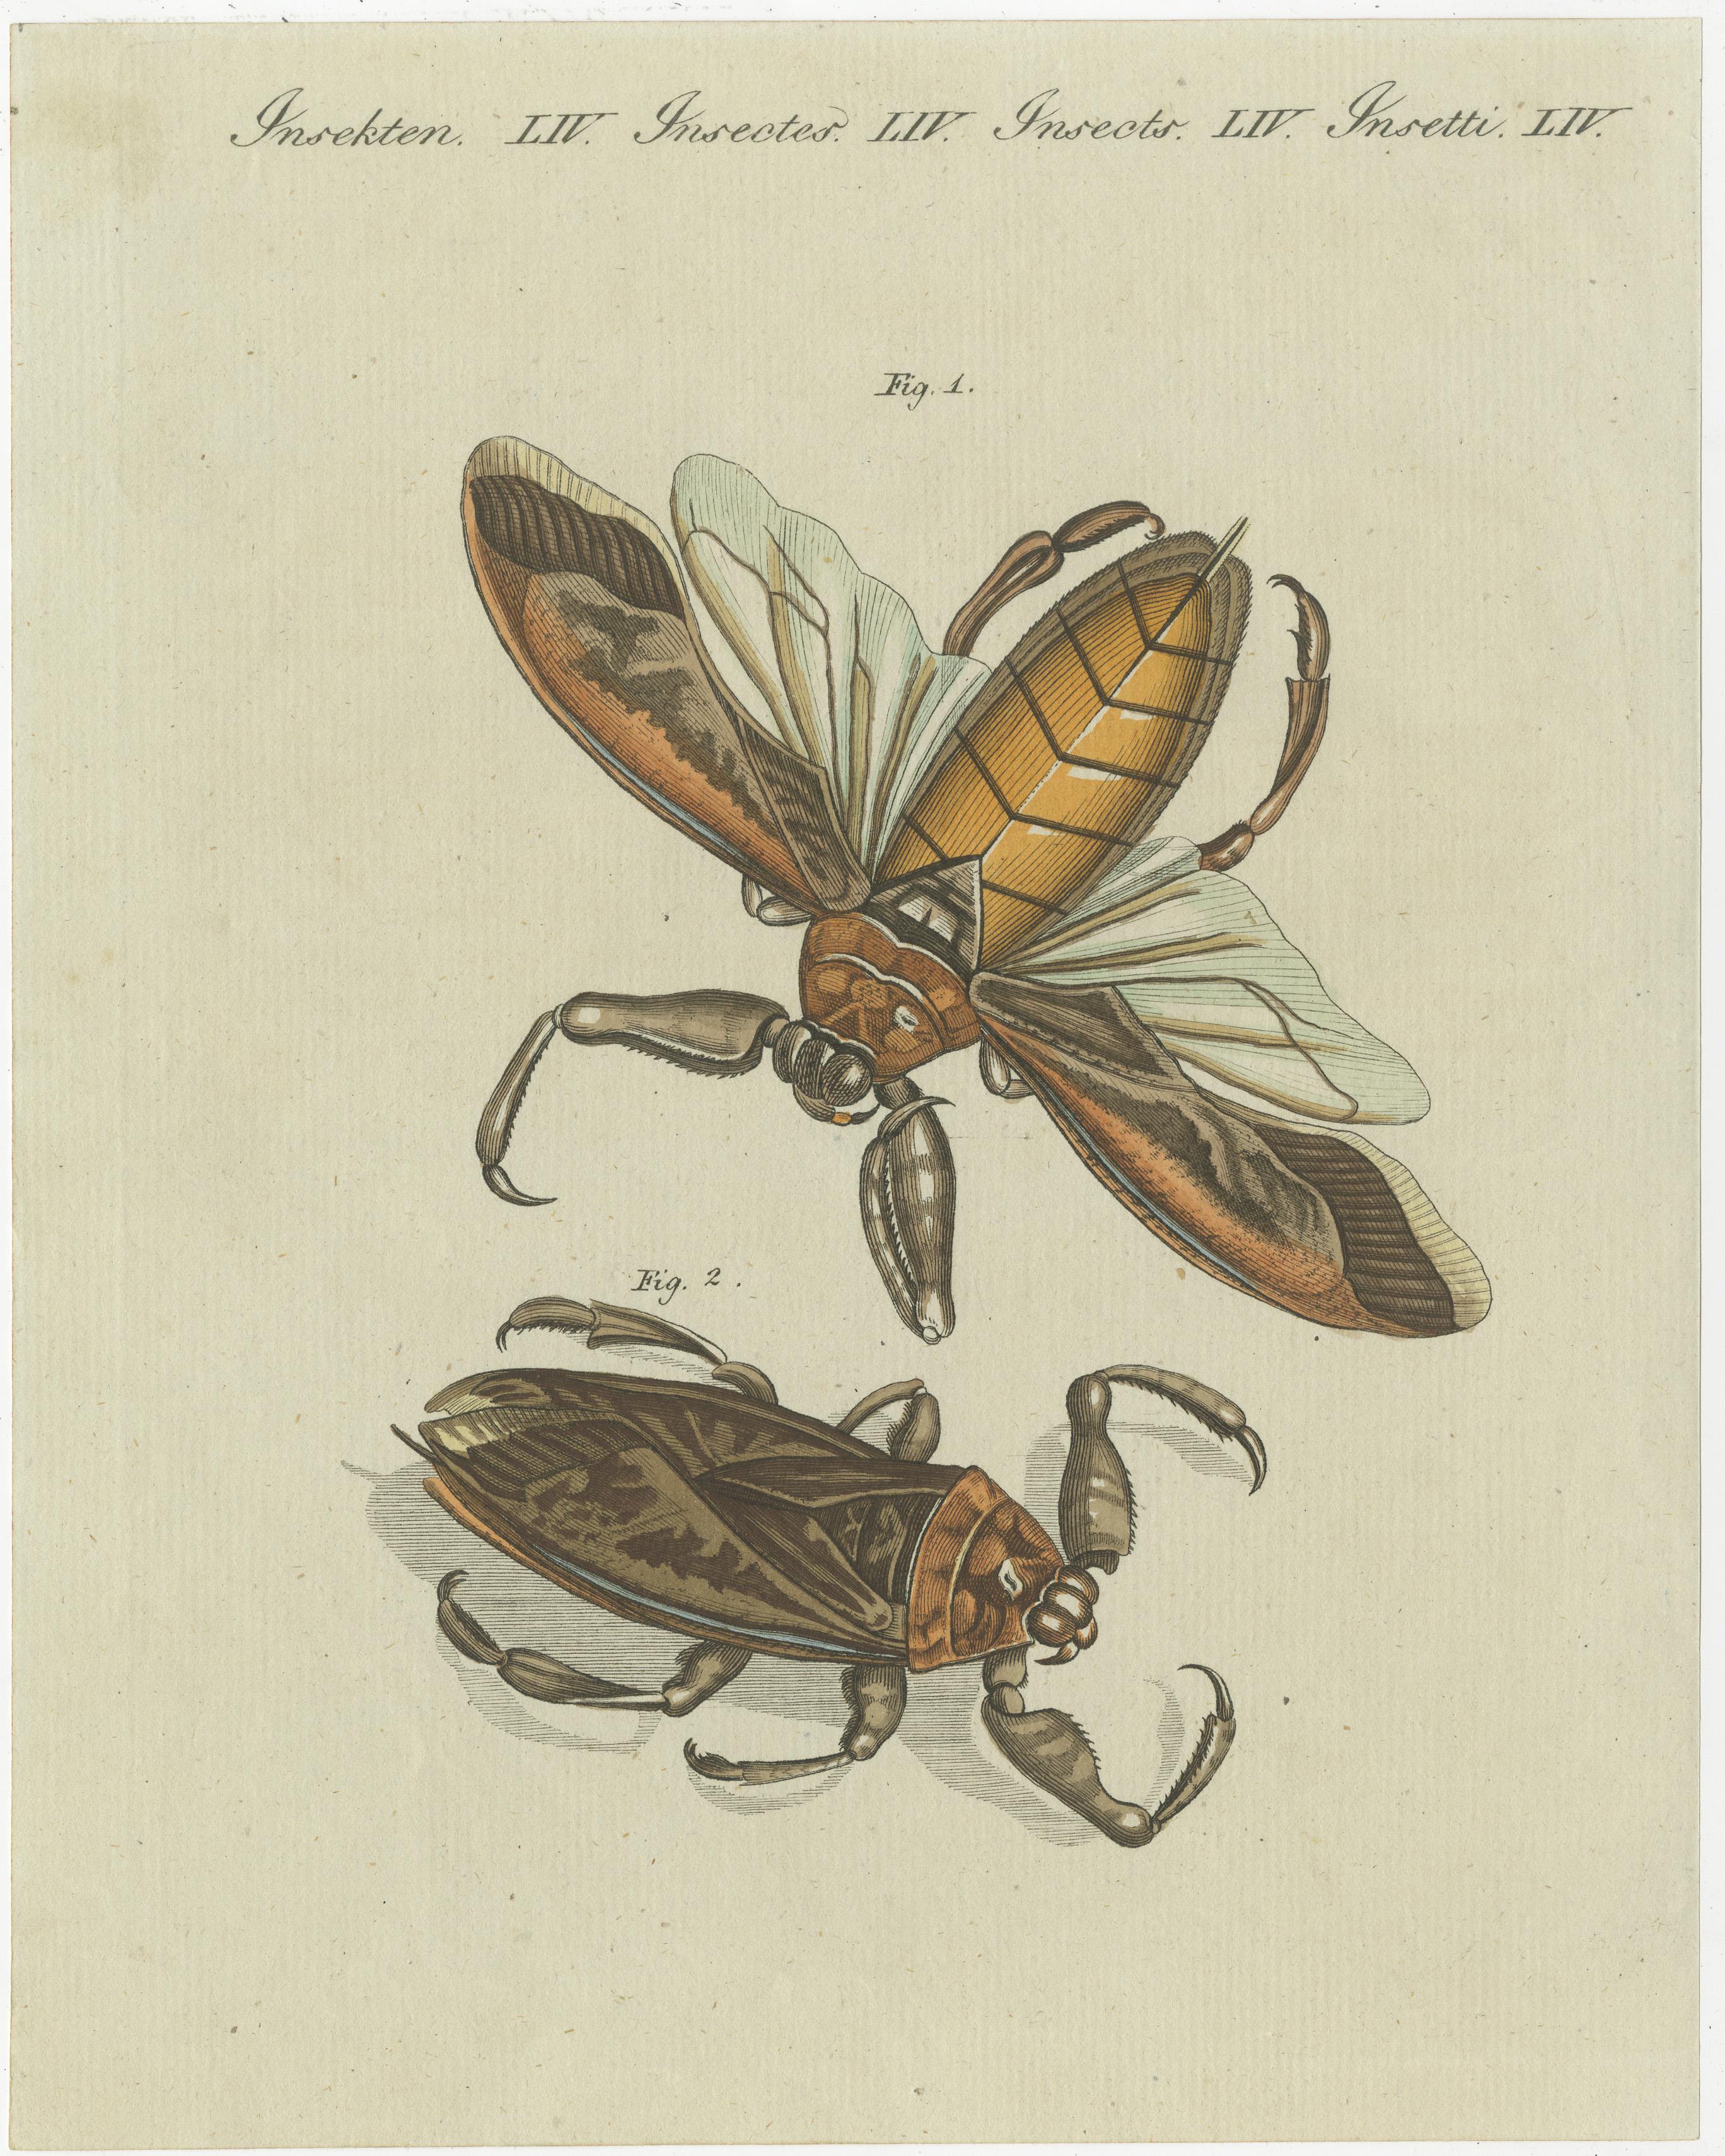 Set of four original antique prints of various insects including the grain weevil, human flea, human louse, the great water scorpion, Surinam water scorpion, harlequin beetle and the sabertooth longhorn beetle. These prints originate from